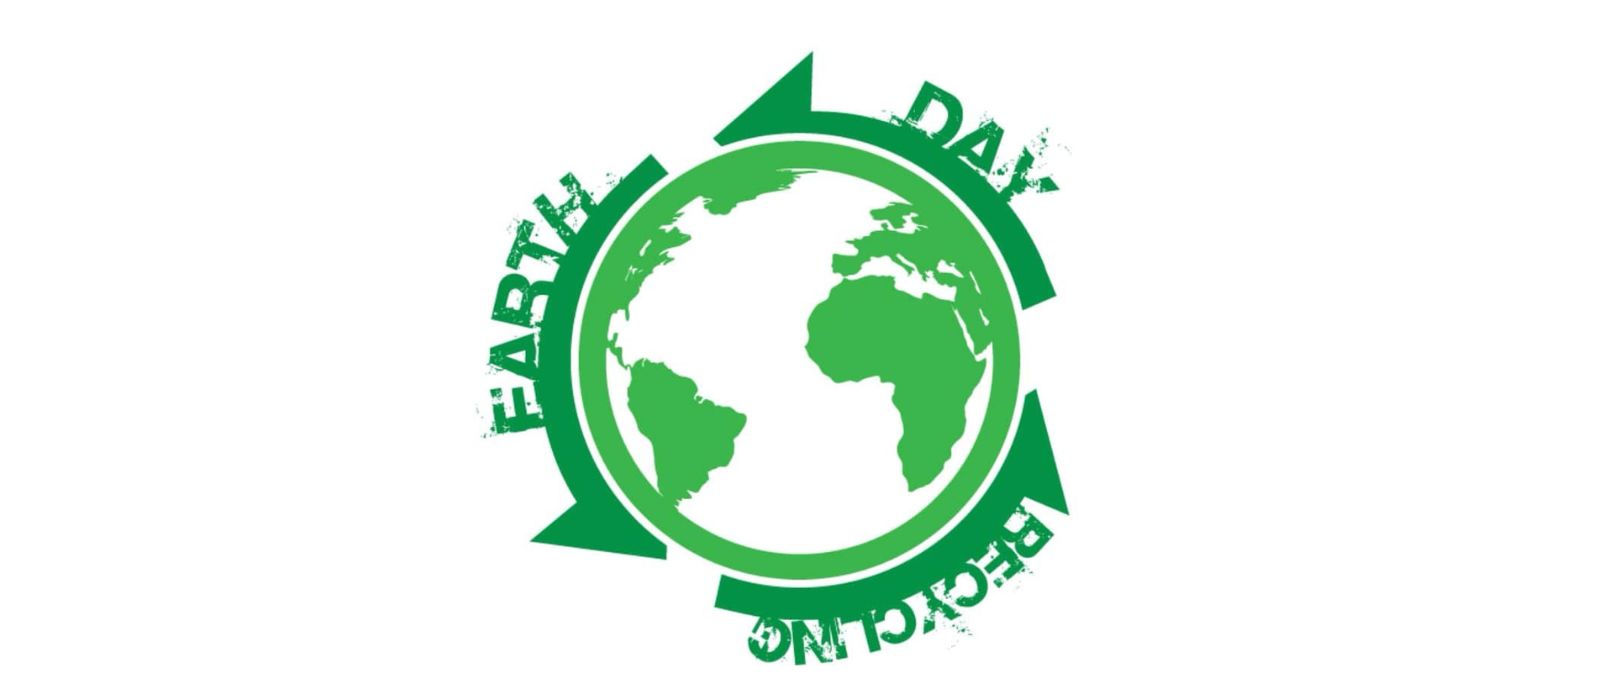 Earth Day – Transwaste Challenges you!